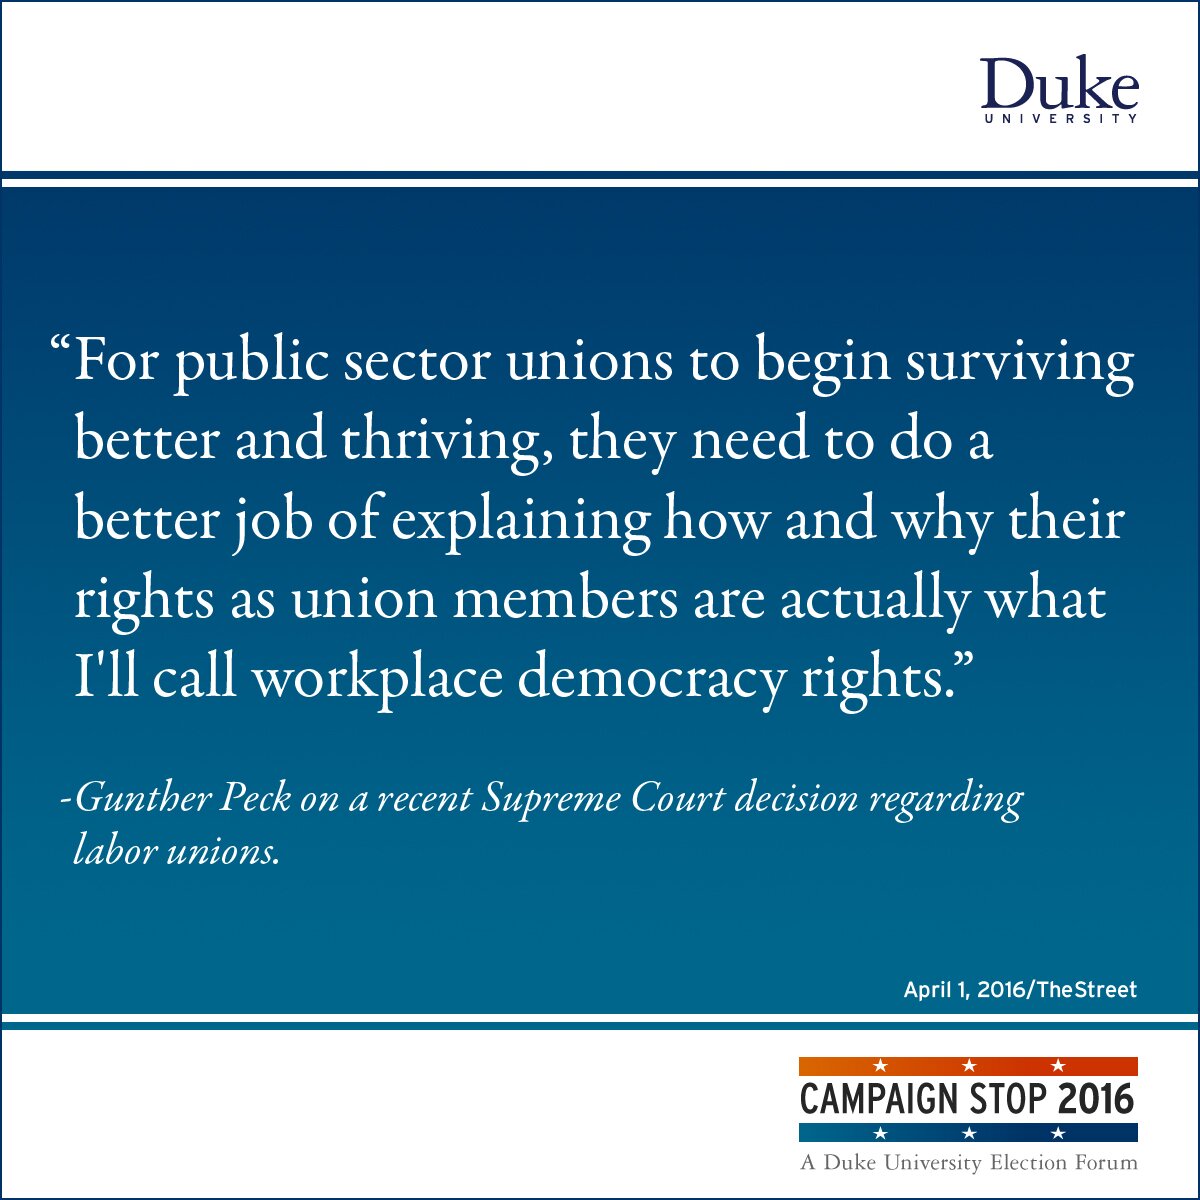 “For public sector unions to begin surviving better and thriving, they need to do a better job of explaining how and why their rights as union members are actually what I